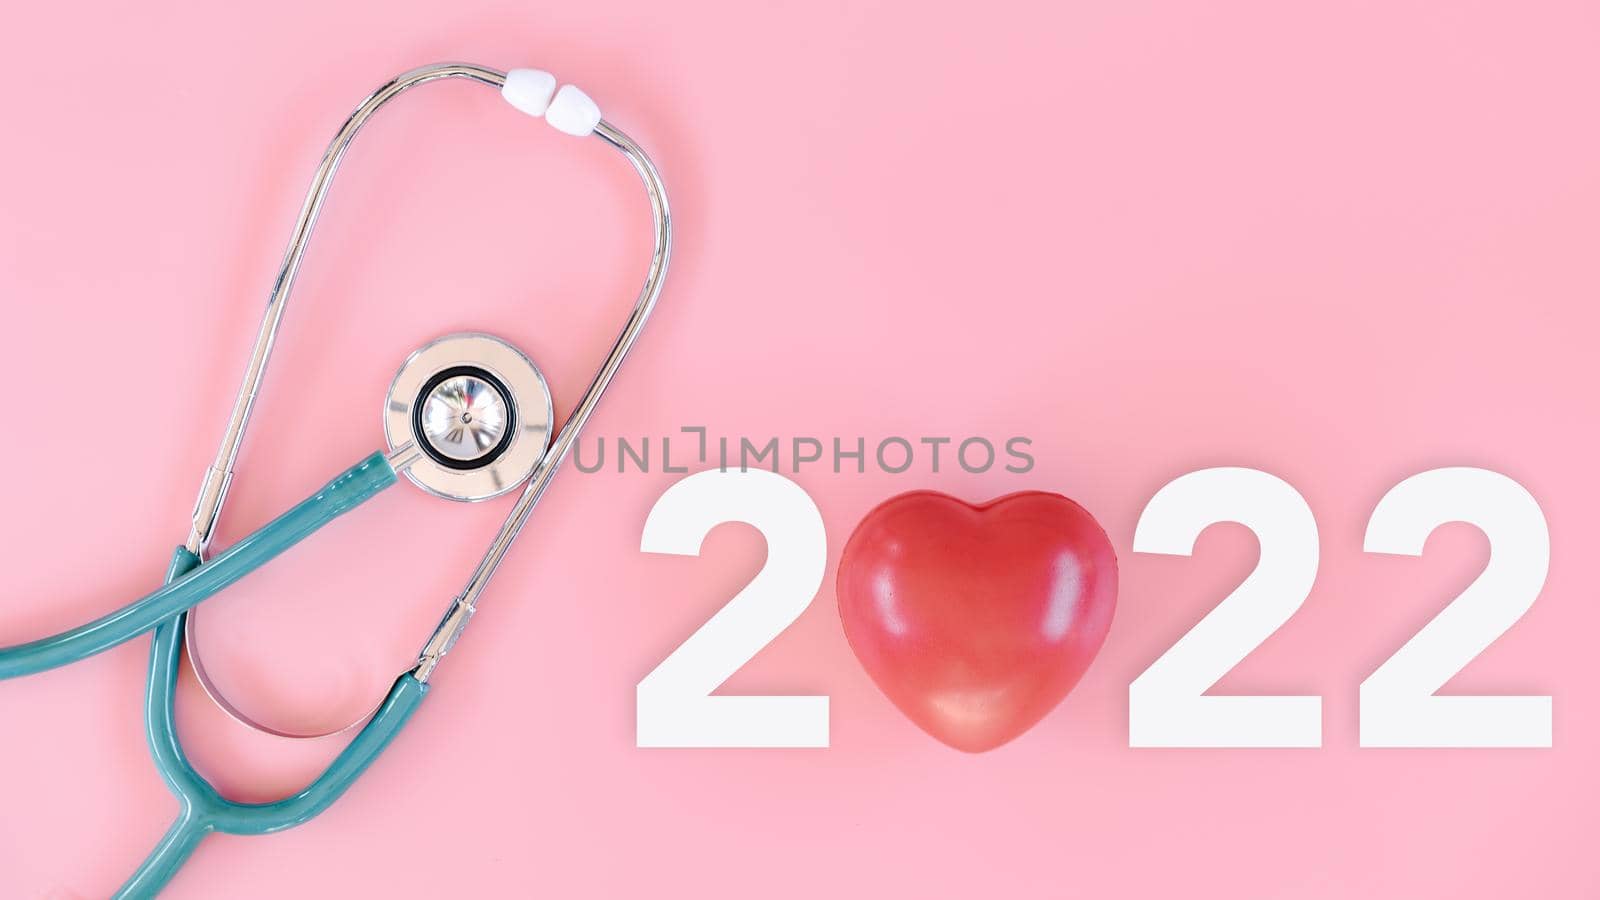 Medical Checkup and Health Insurance on Year 2022 Concept, Stethoscope With Text New Year 2022 on Isolate Pink Background. Doctor Appointment Calendar for Medical Examination Annual 2022. Medical Care by MahaHeang245789